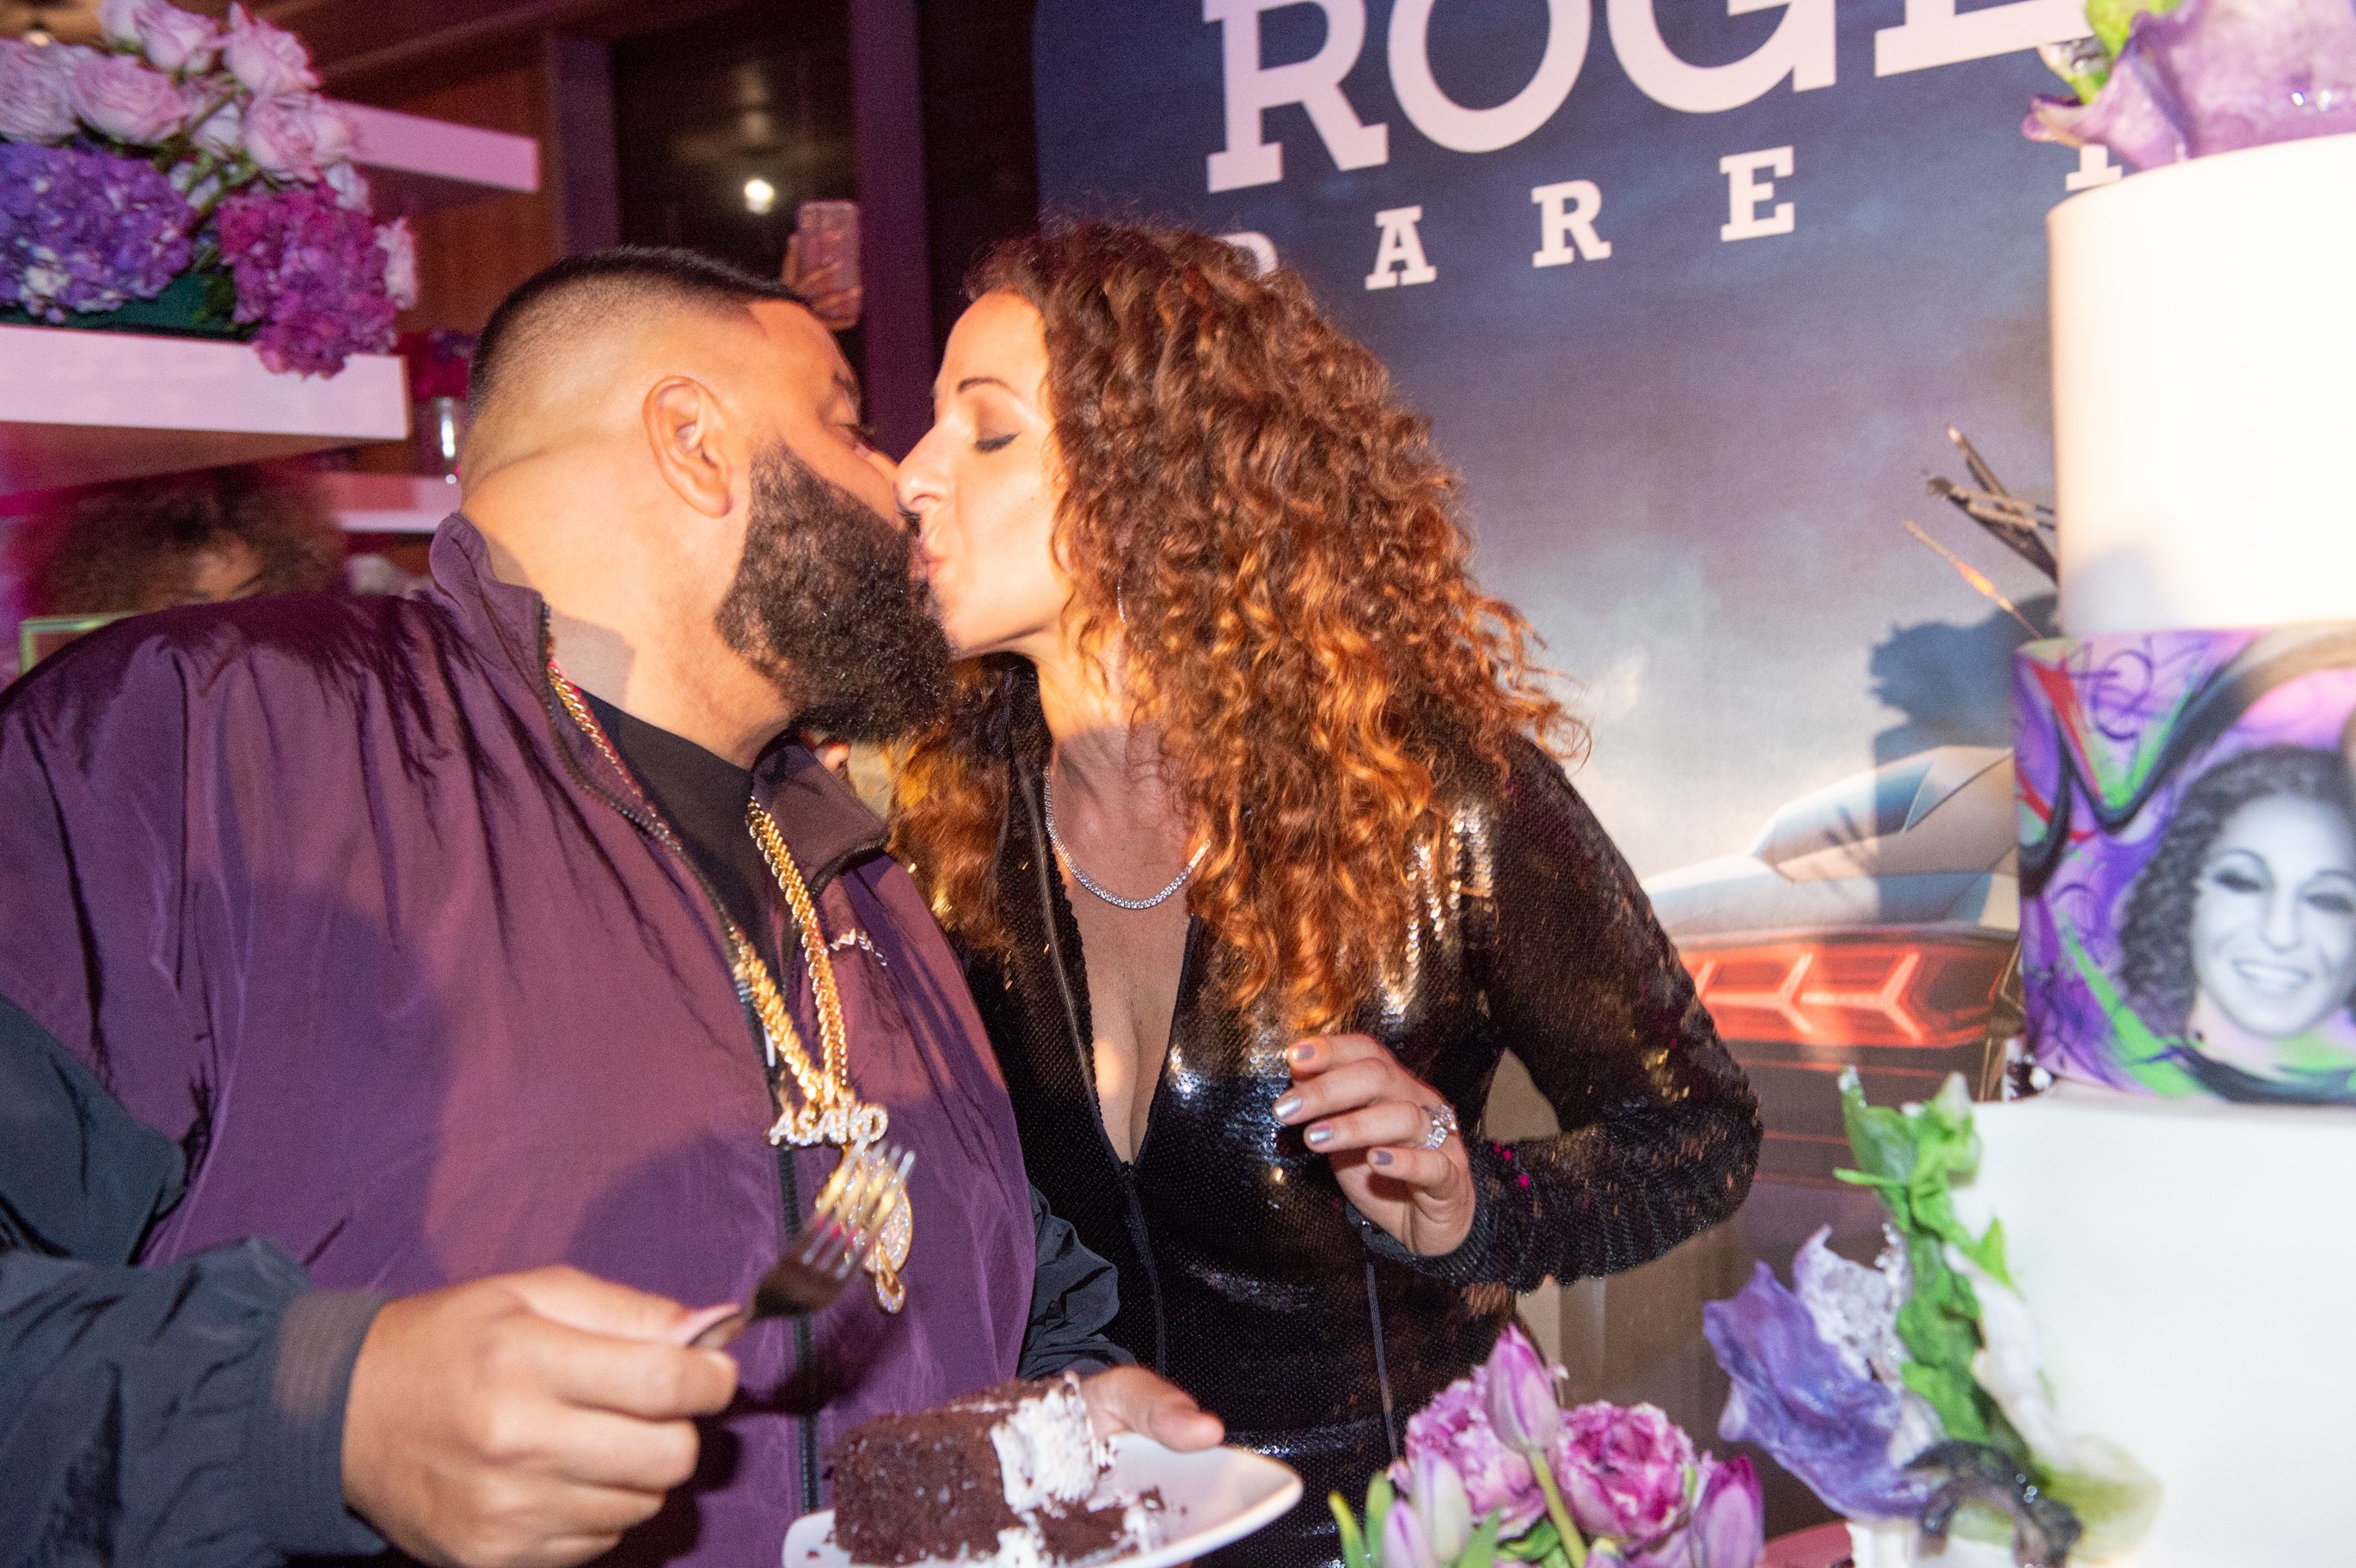  Nicole Tuck and Dj Khaled attend Nicole & DJ Khaled's Birthday Celebration With Haute Living And Roger Dubuis at Perez Art Museum Miami on December 9, 2018 in Miami, Florida. | Source: Getty Images